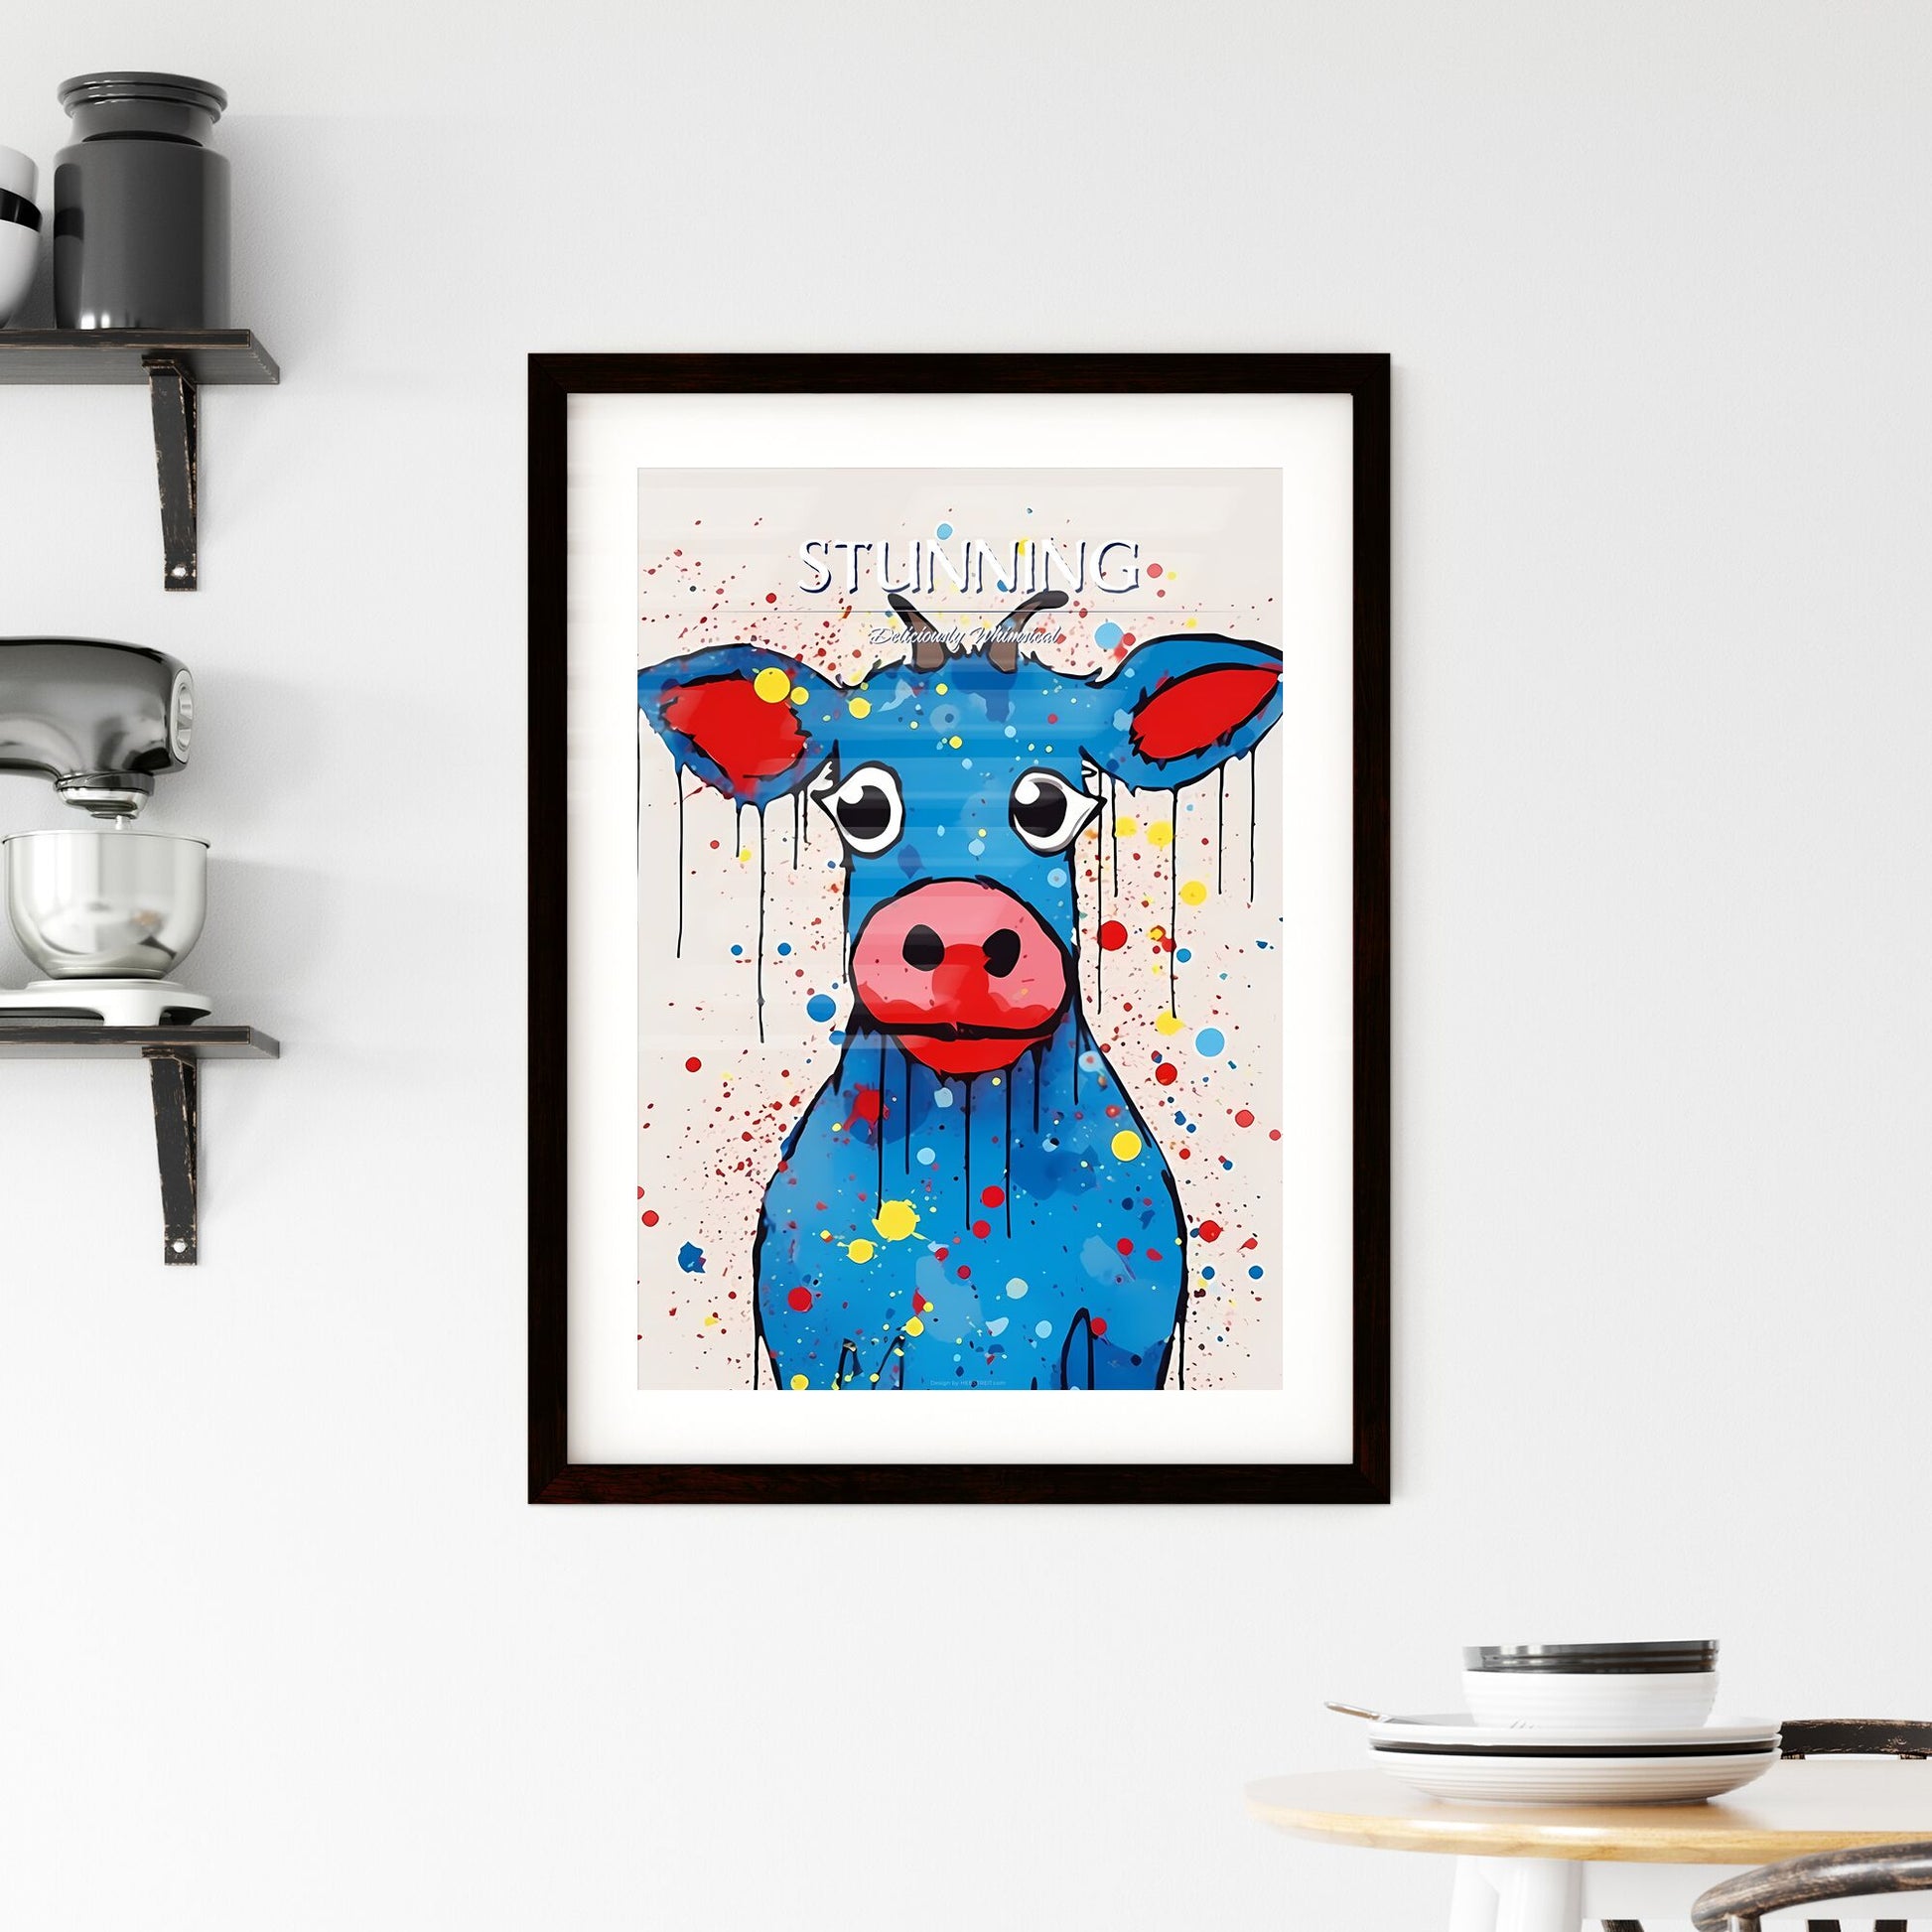 A Poster of minimalist pig art - A Blue Cow With Red Lips And Horns Default Title